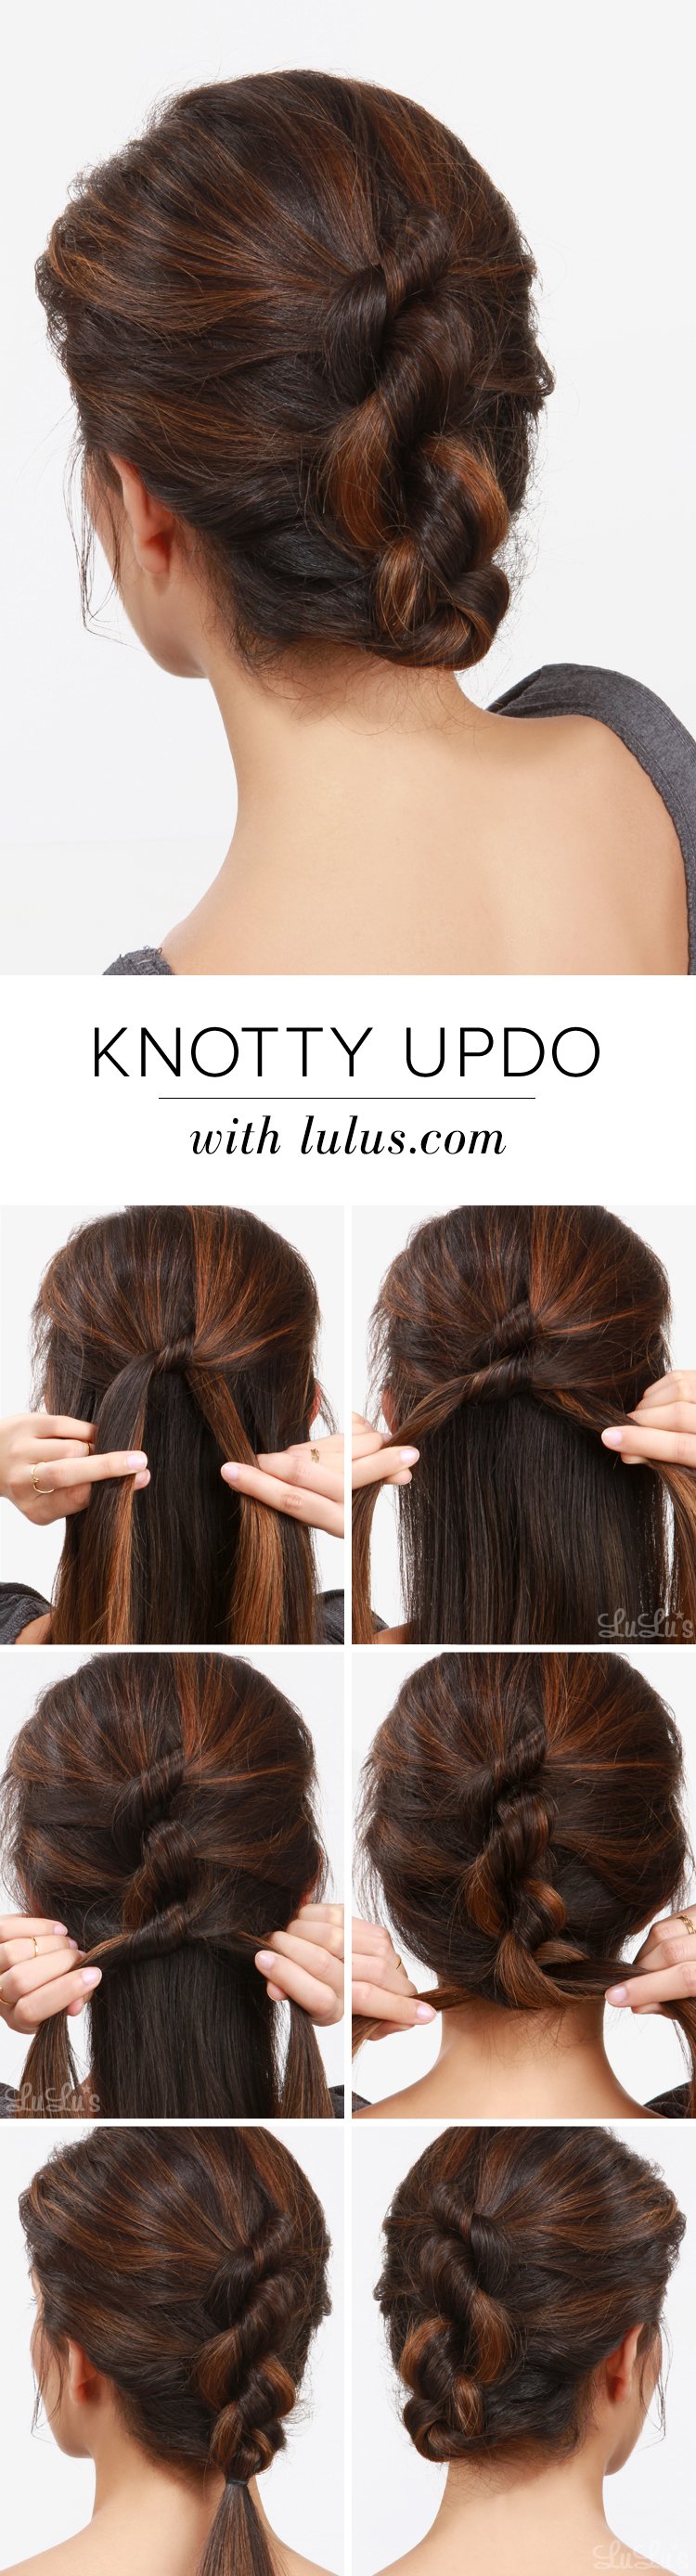 Simply knotted updo hairstyle